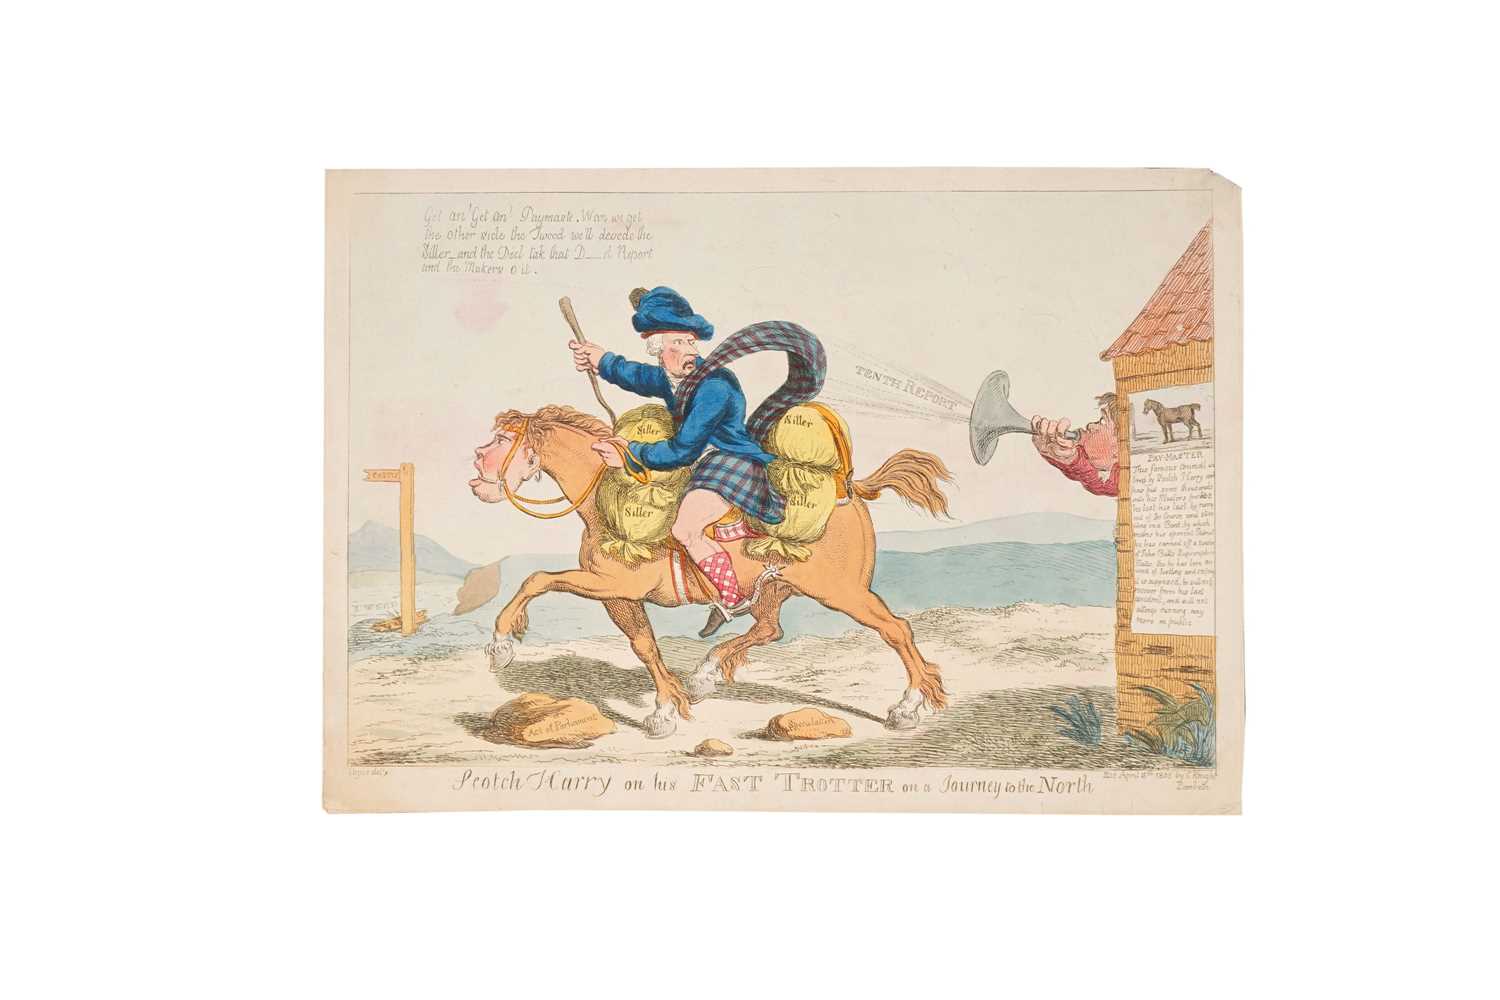 James Gillray - Scotch Harry on His Fast Trotter & Hounds Finding | etchings - Image 2 of 3